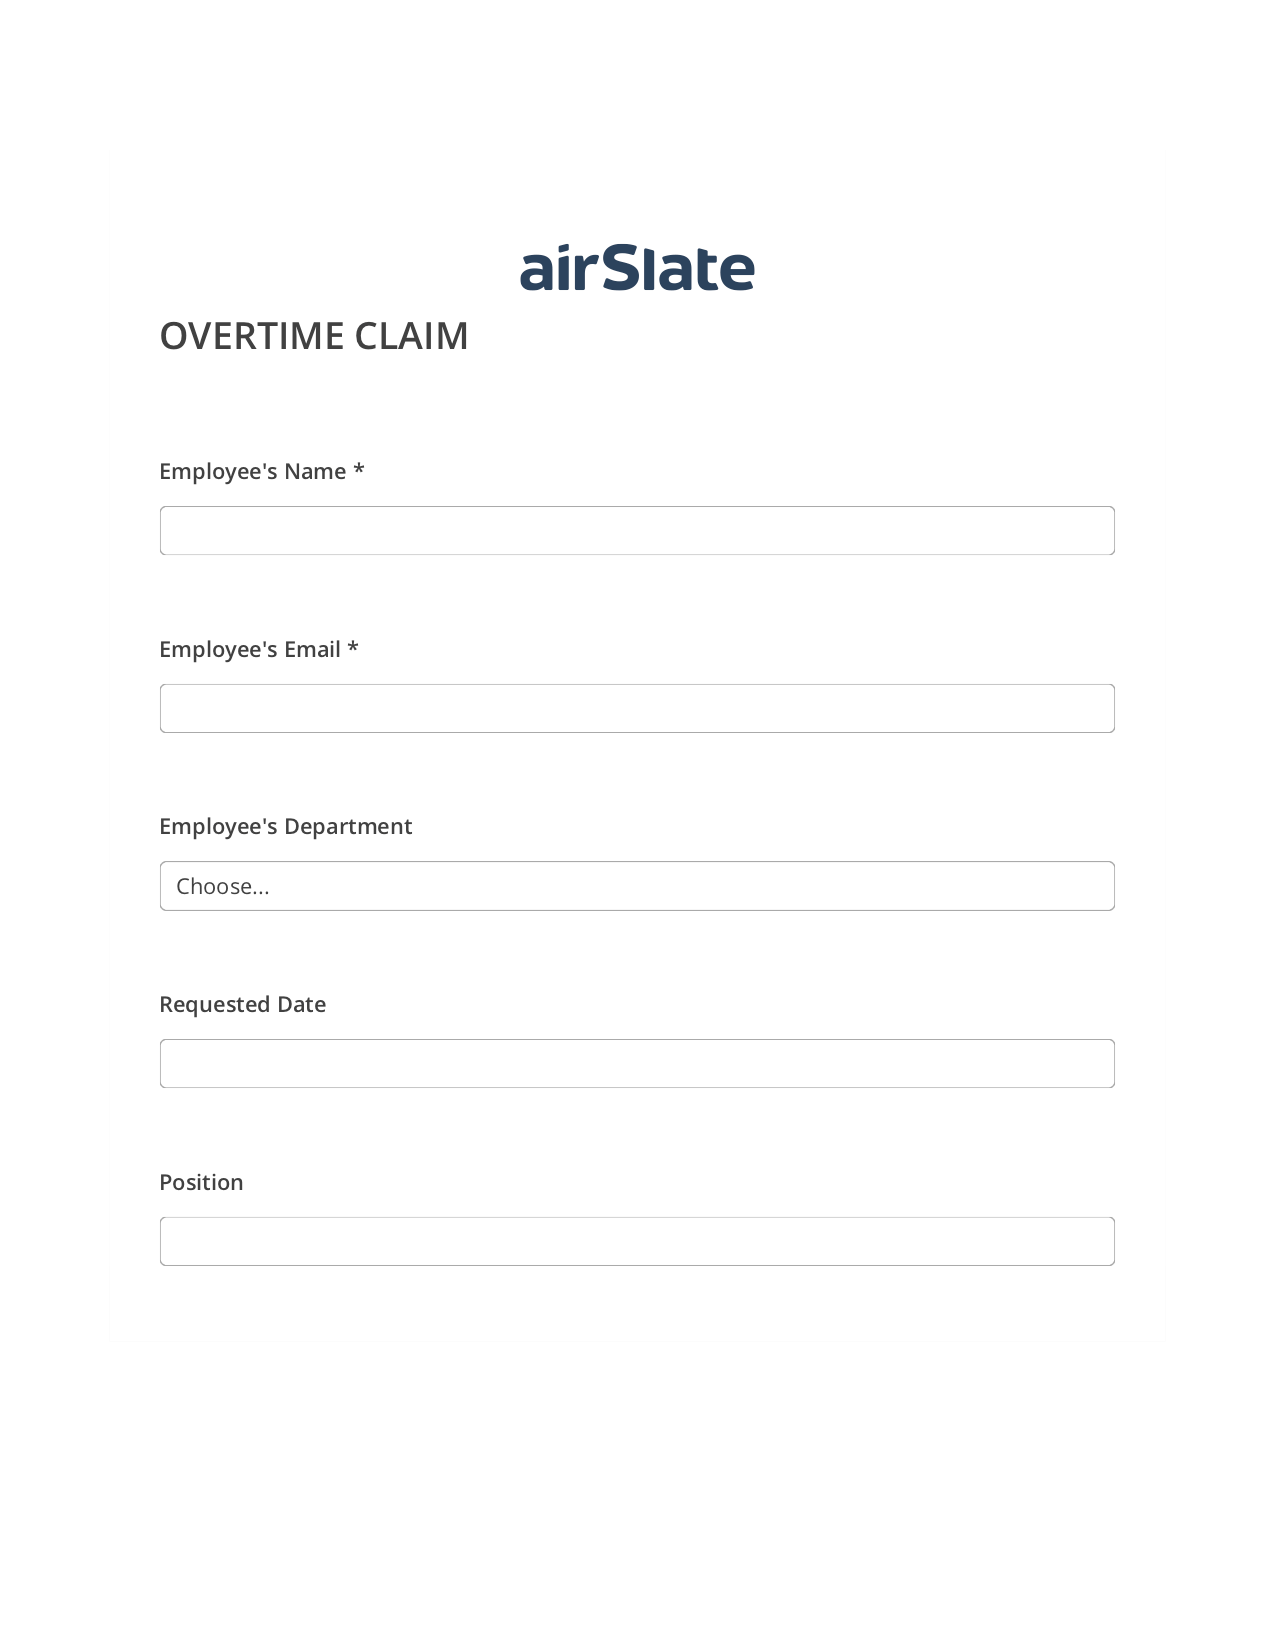 Overtime Claim Flow Create Slate from another Flow Bot